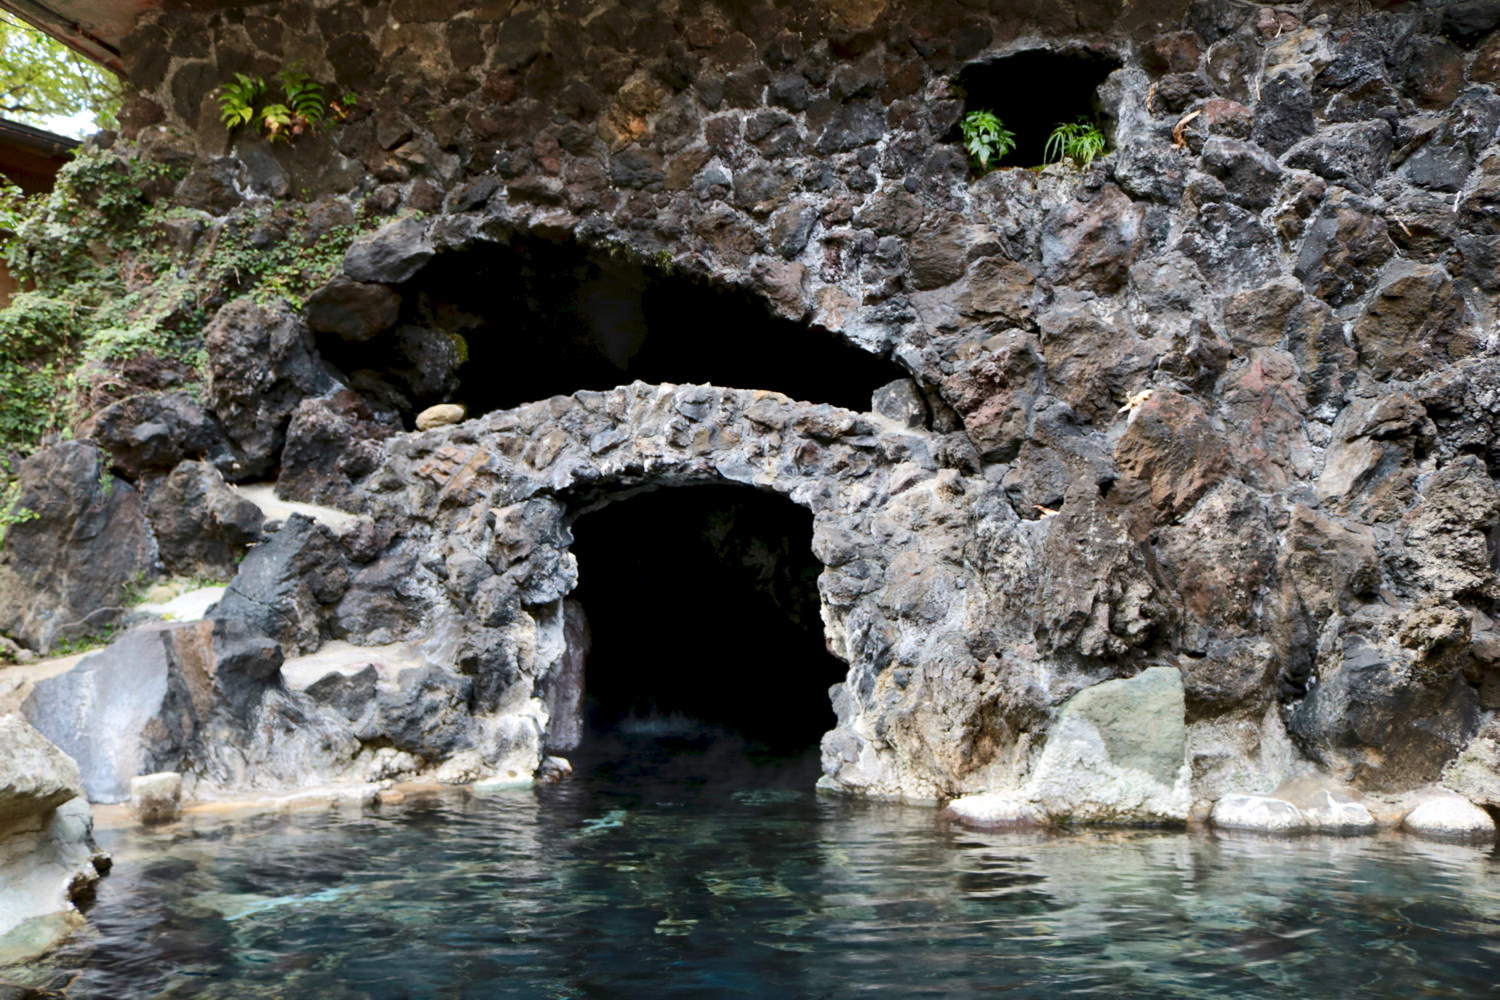 The entrance to a cave bath